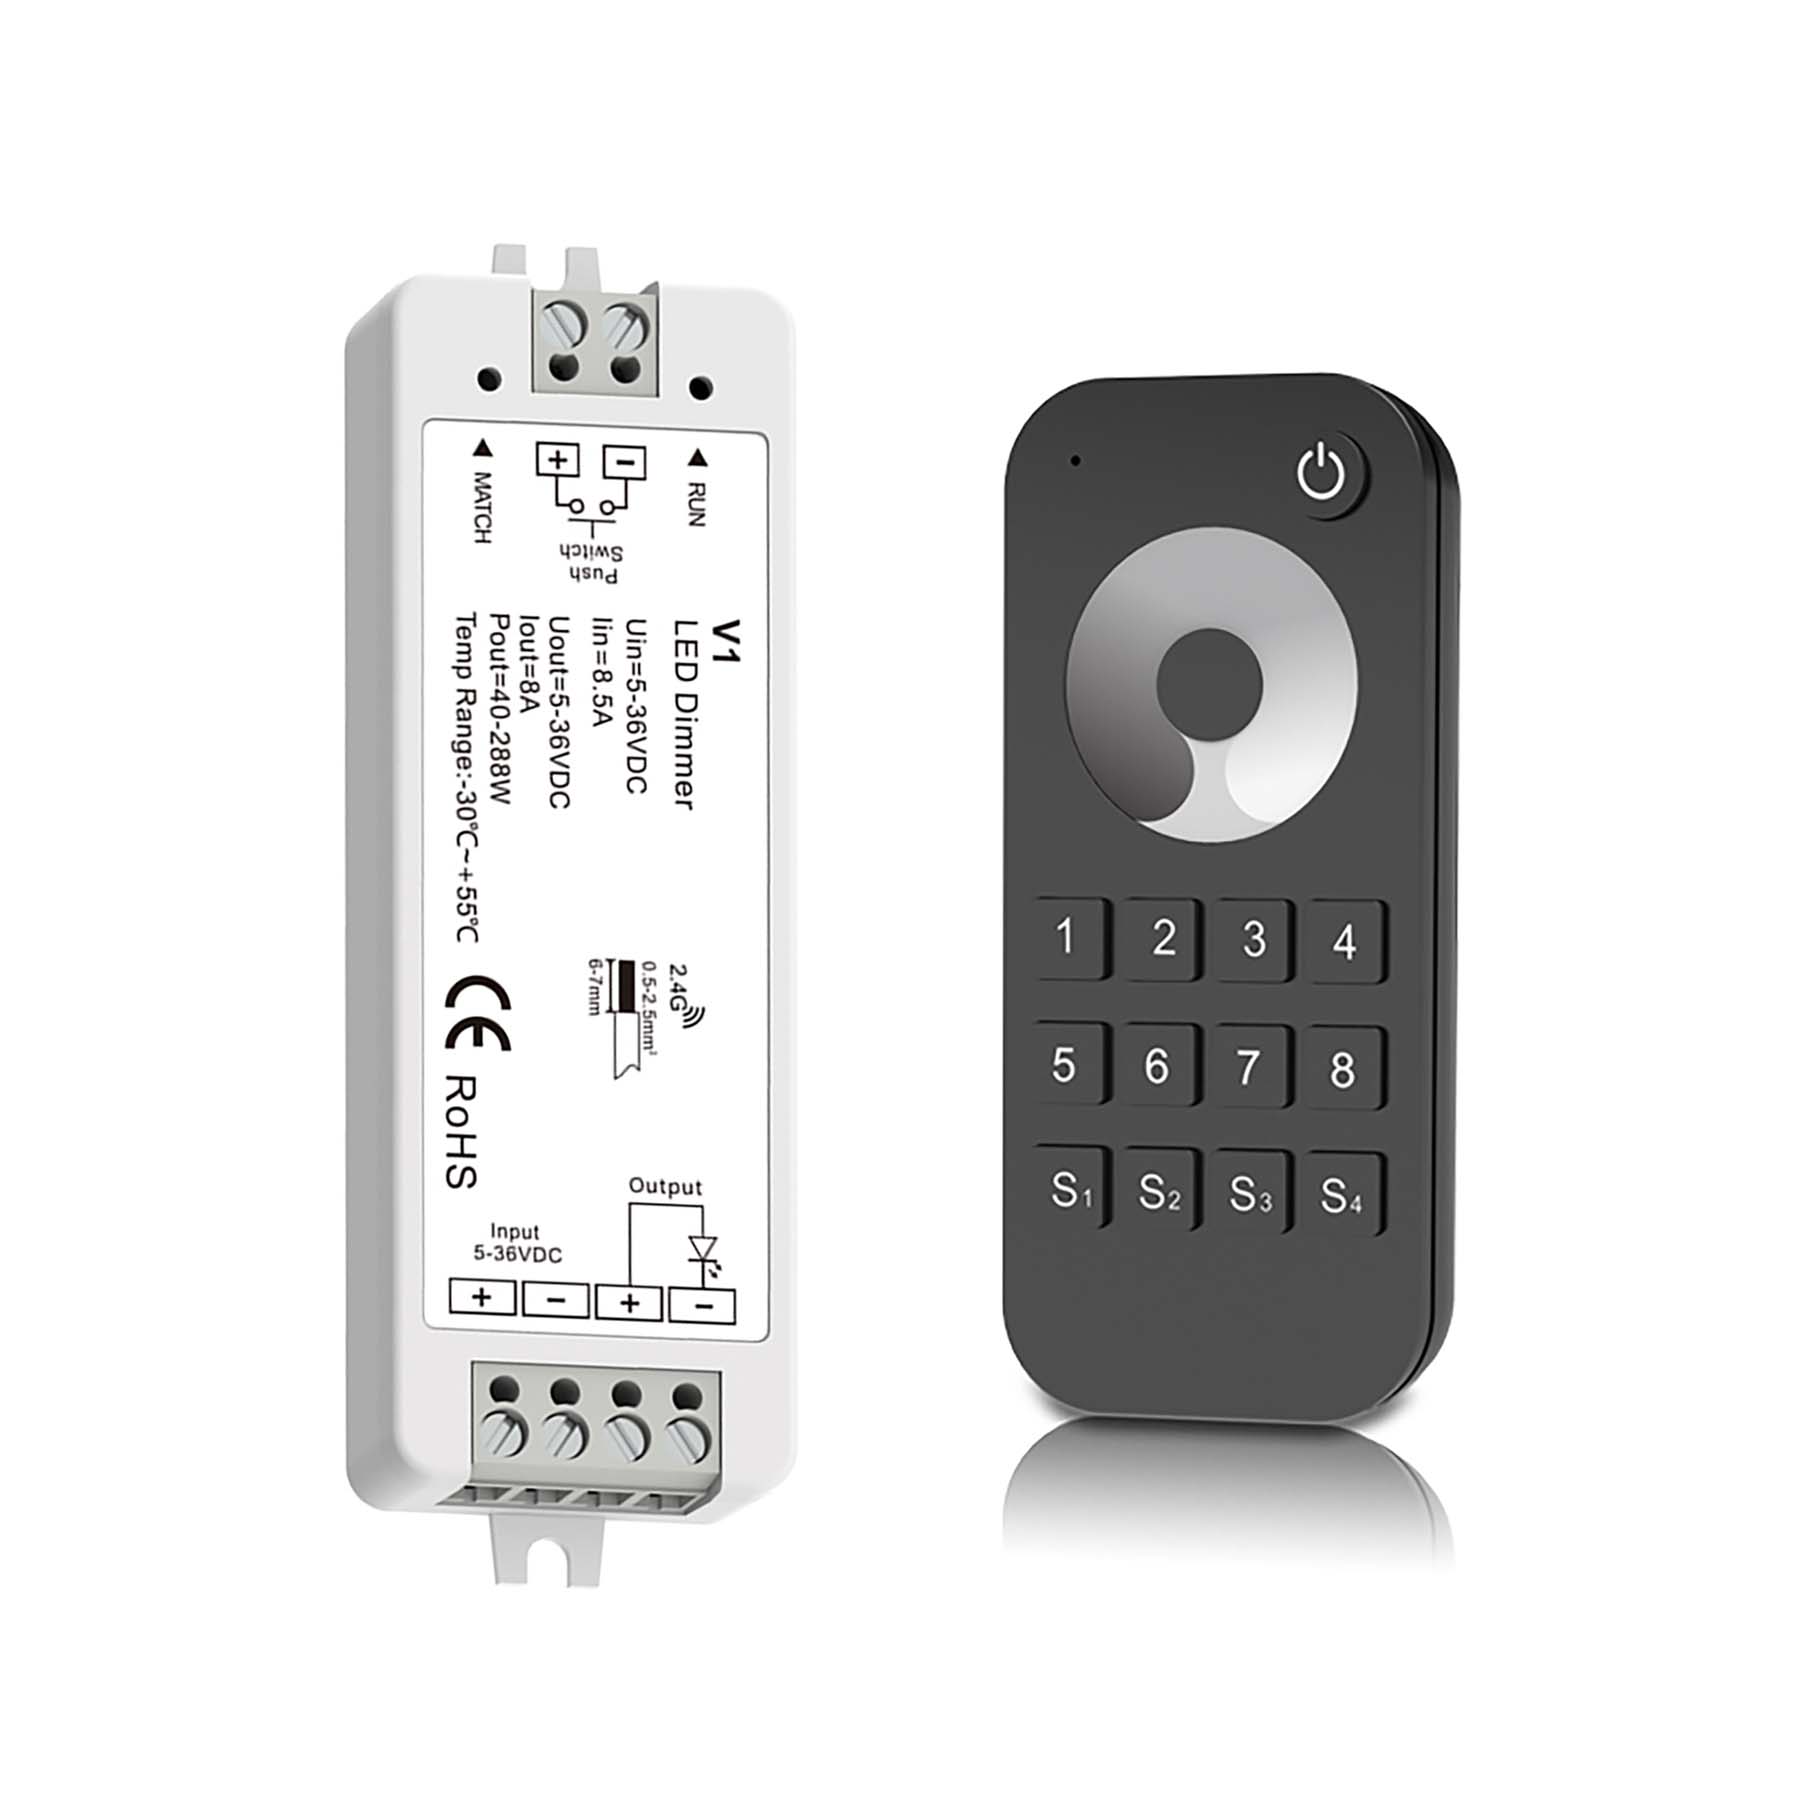 G.W.S. LED LED 5-36V DC Dimming Controller V1 + 8 Zone Remote Control RT8